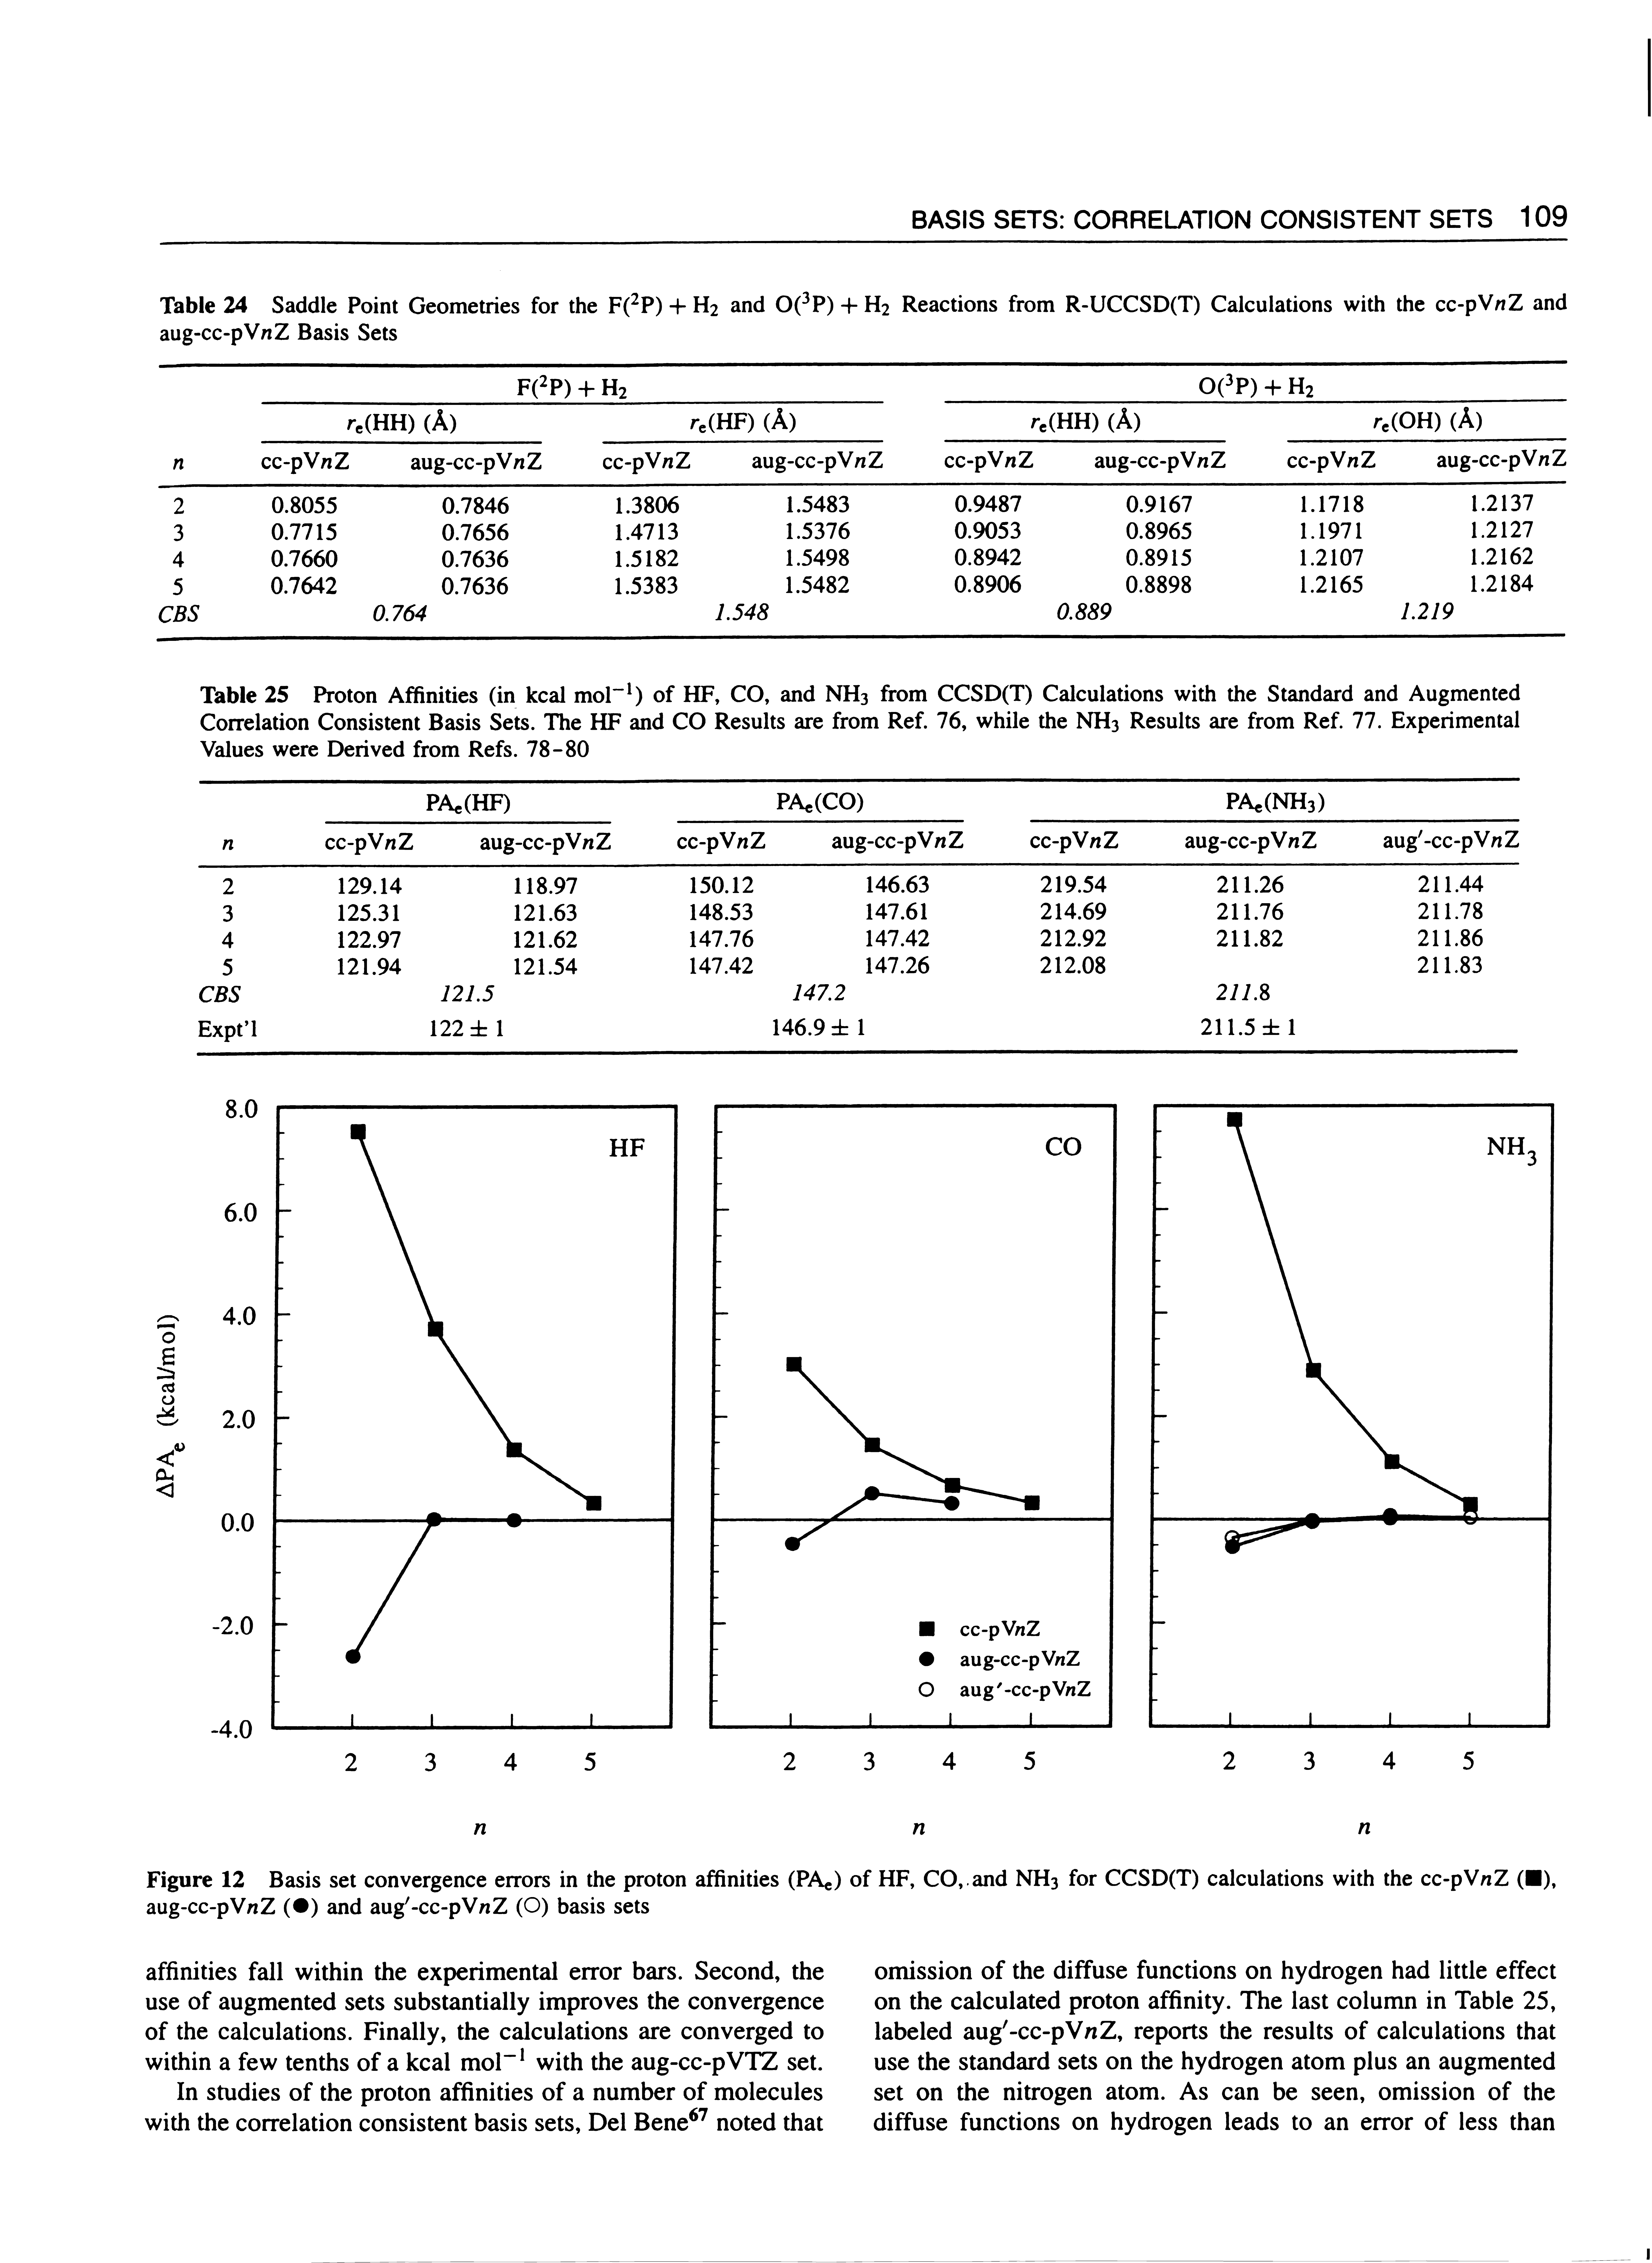 Table 25 Proton Affinities (in kcal mol ) of HF, CO, and NH3 from CCSD(T) Calculations with the Standard and Augmented Correlation Consistent Basis Sets. The HF and CO Results are from Ref. 76, while the NH3 Results are from Ref. 77. Experimental Values were Derived from Refs. 78-80...